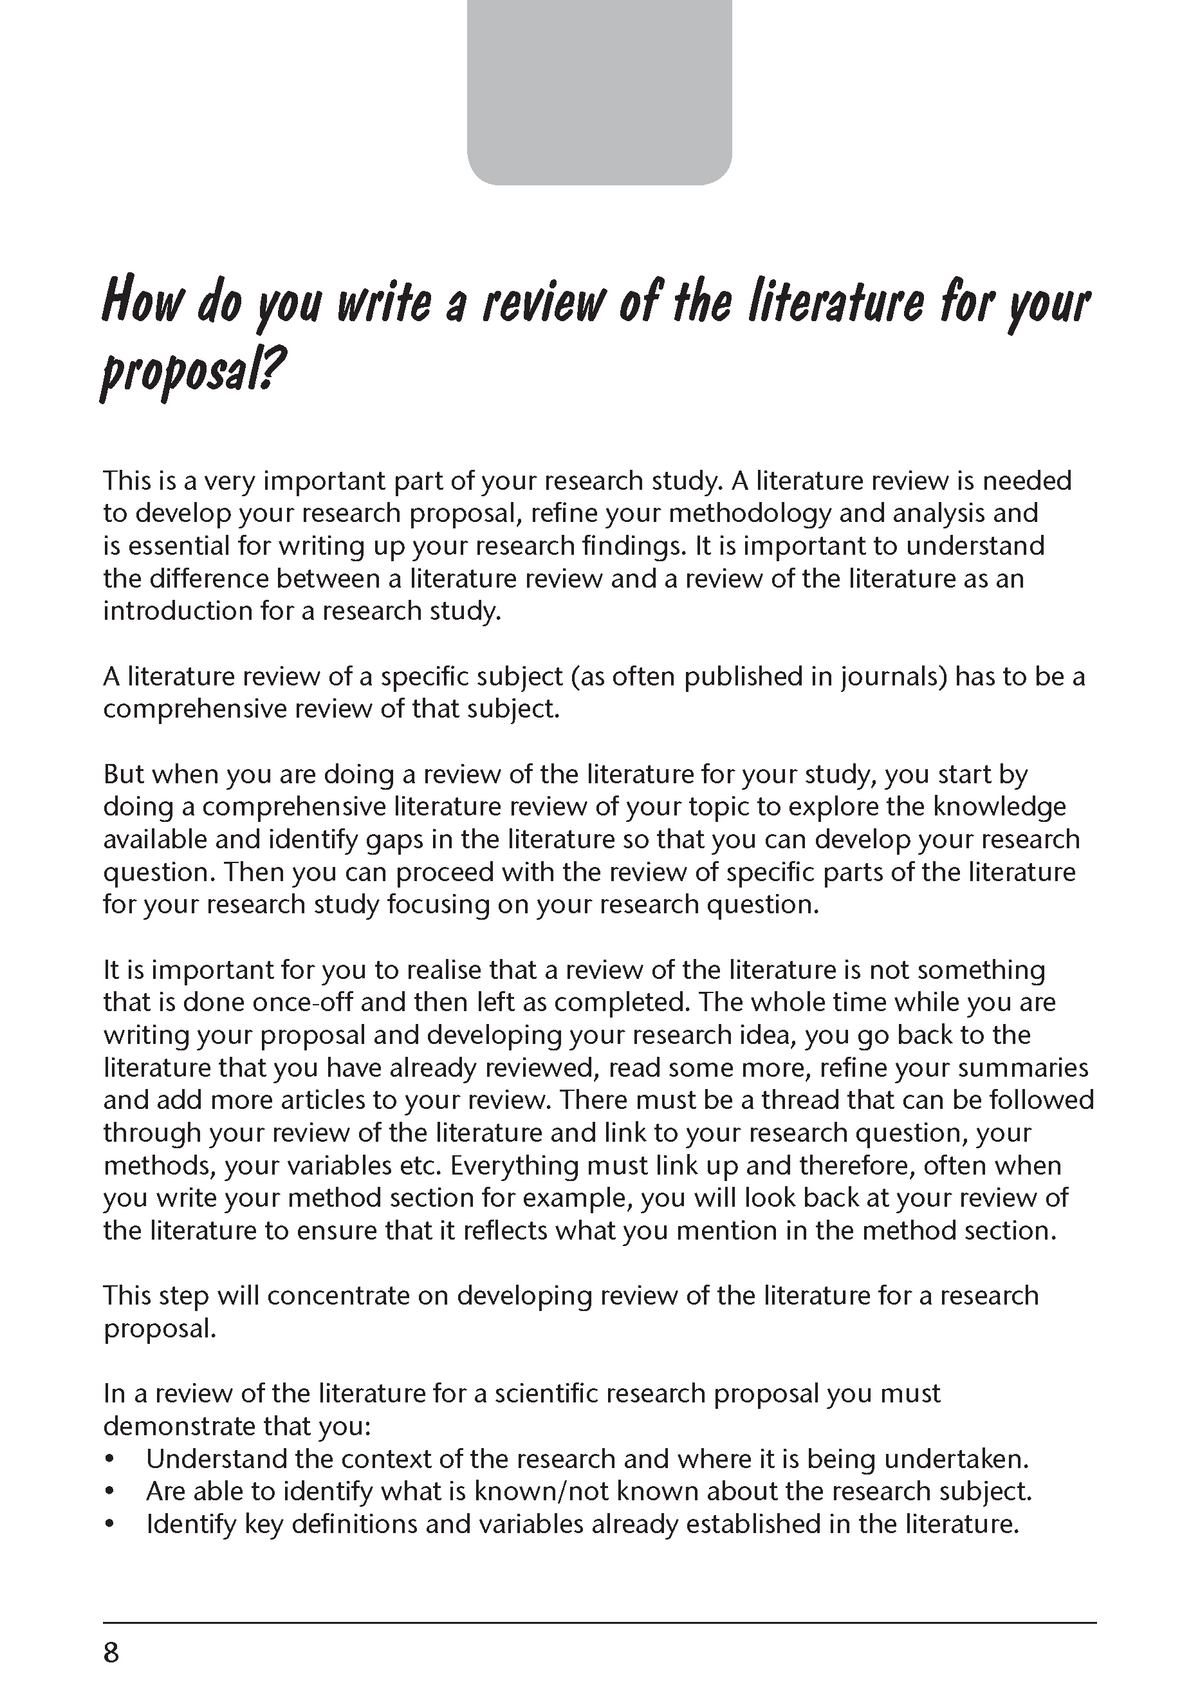 how to write literature review for a proposal